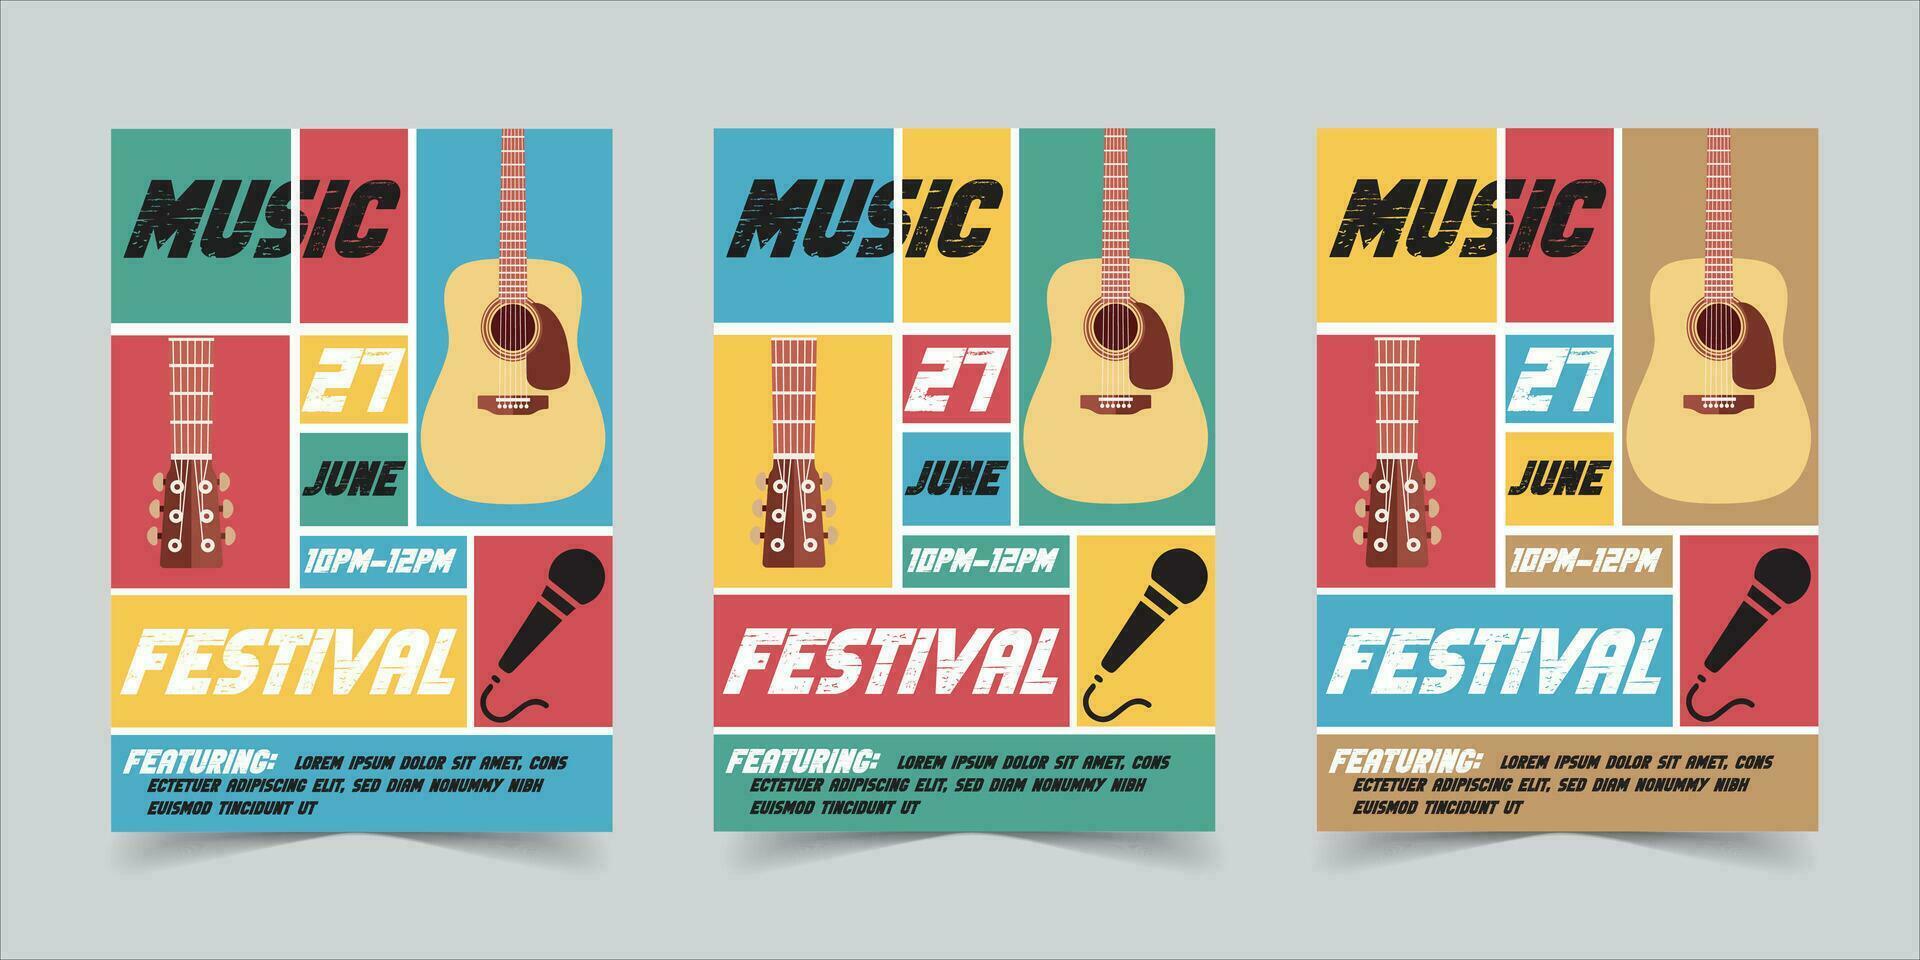 Retro style Music Festival Flyer poster Template Design. old music vintage style flyer vector